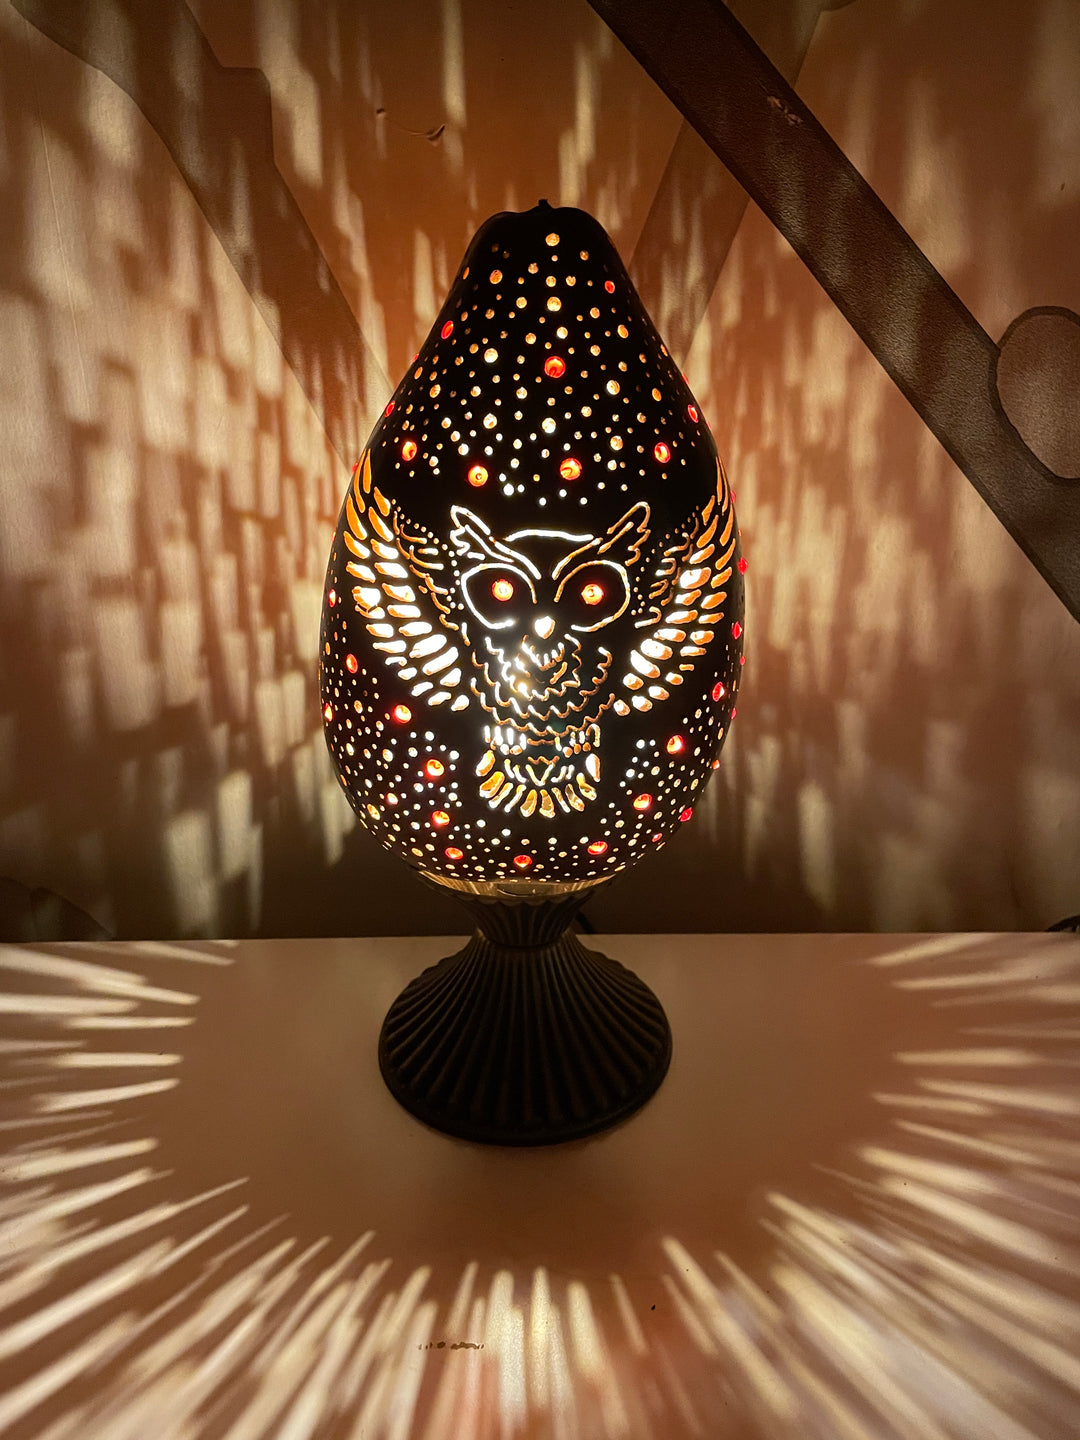 Gourd Lamp - Night Lamp - Ambient Light - Lamp Shade - Light Object - Owl